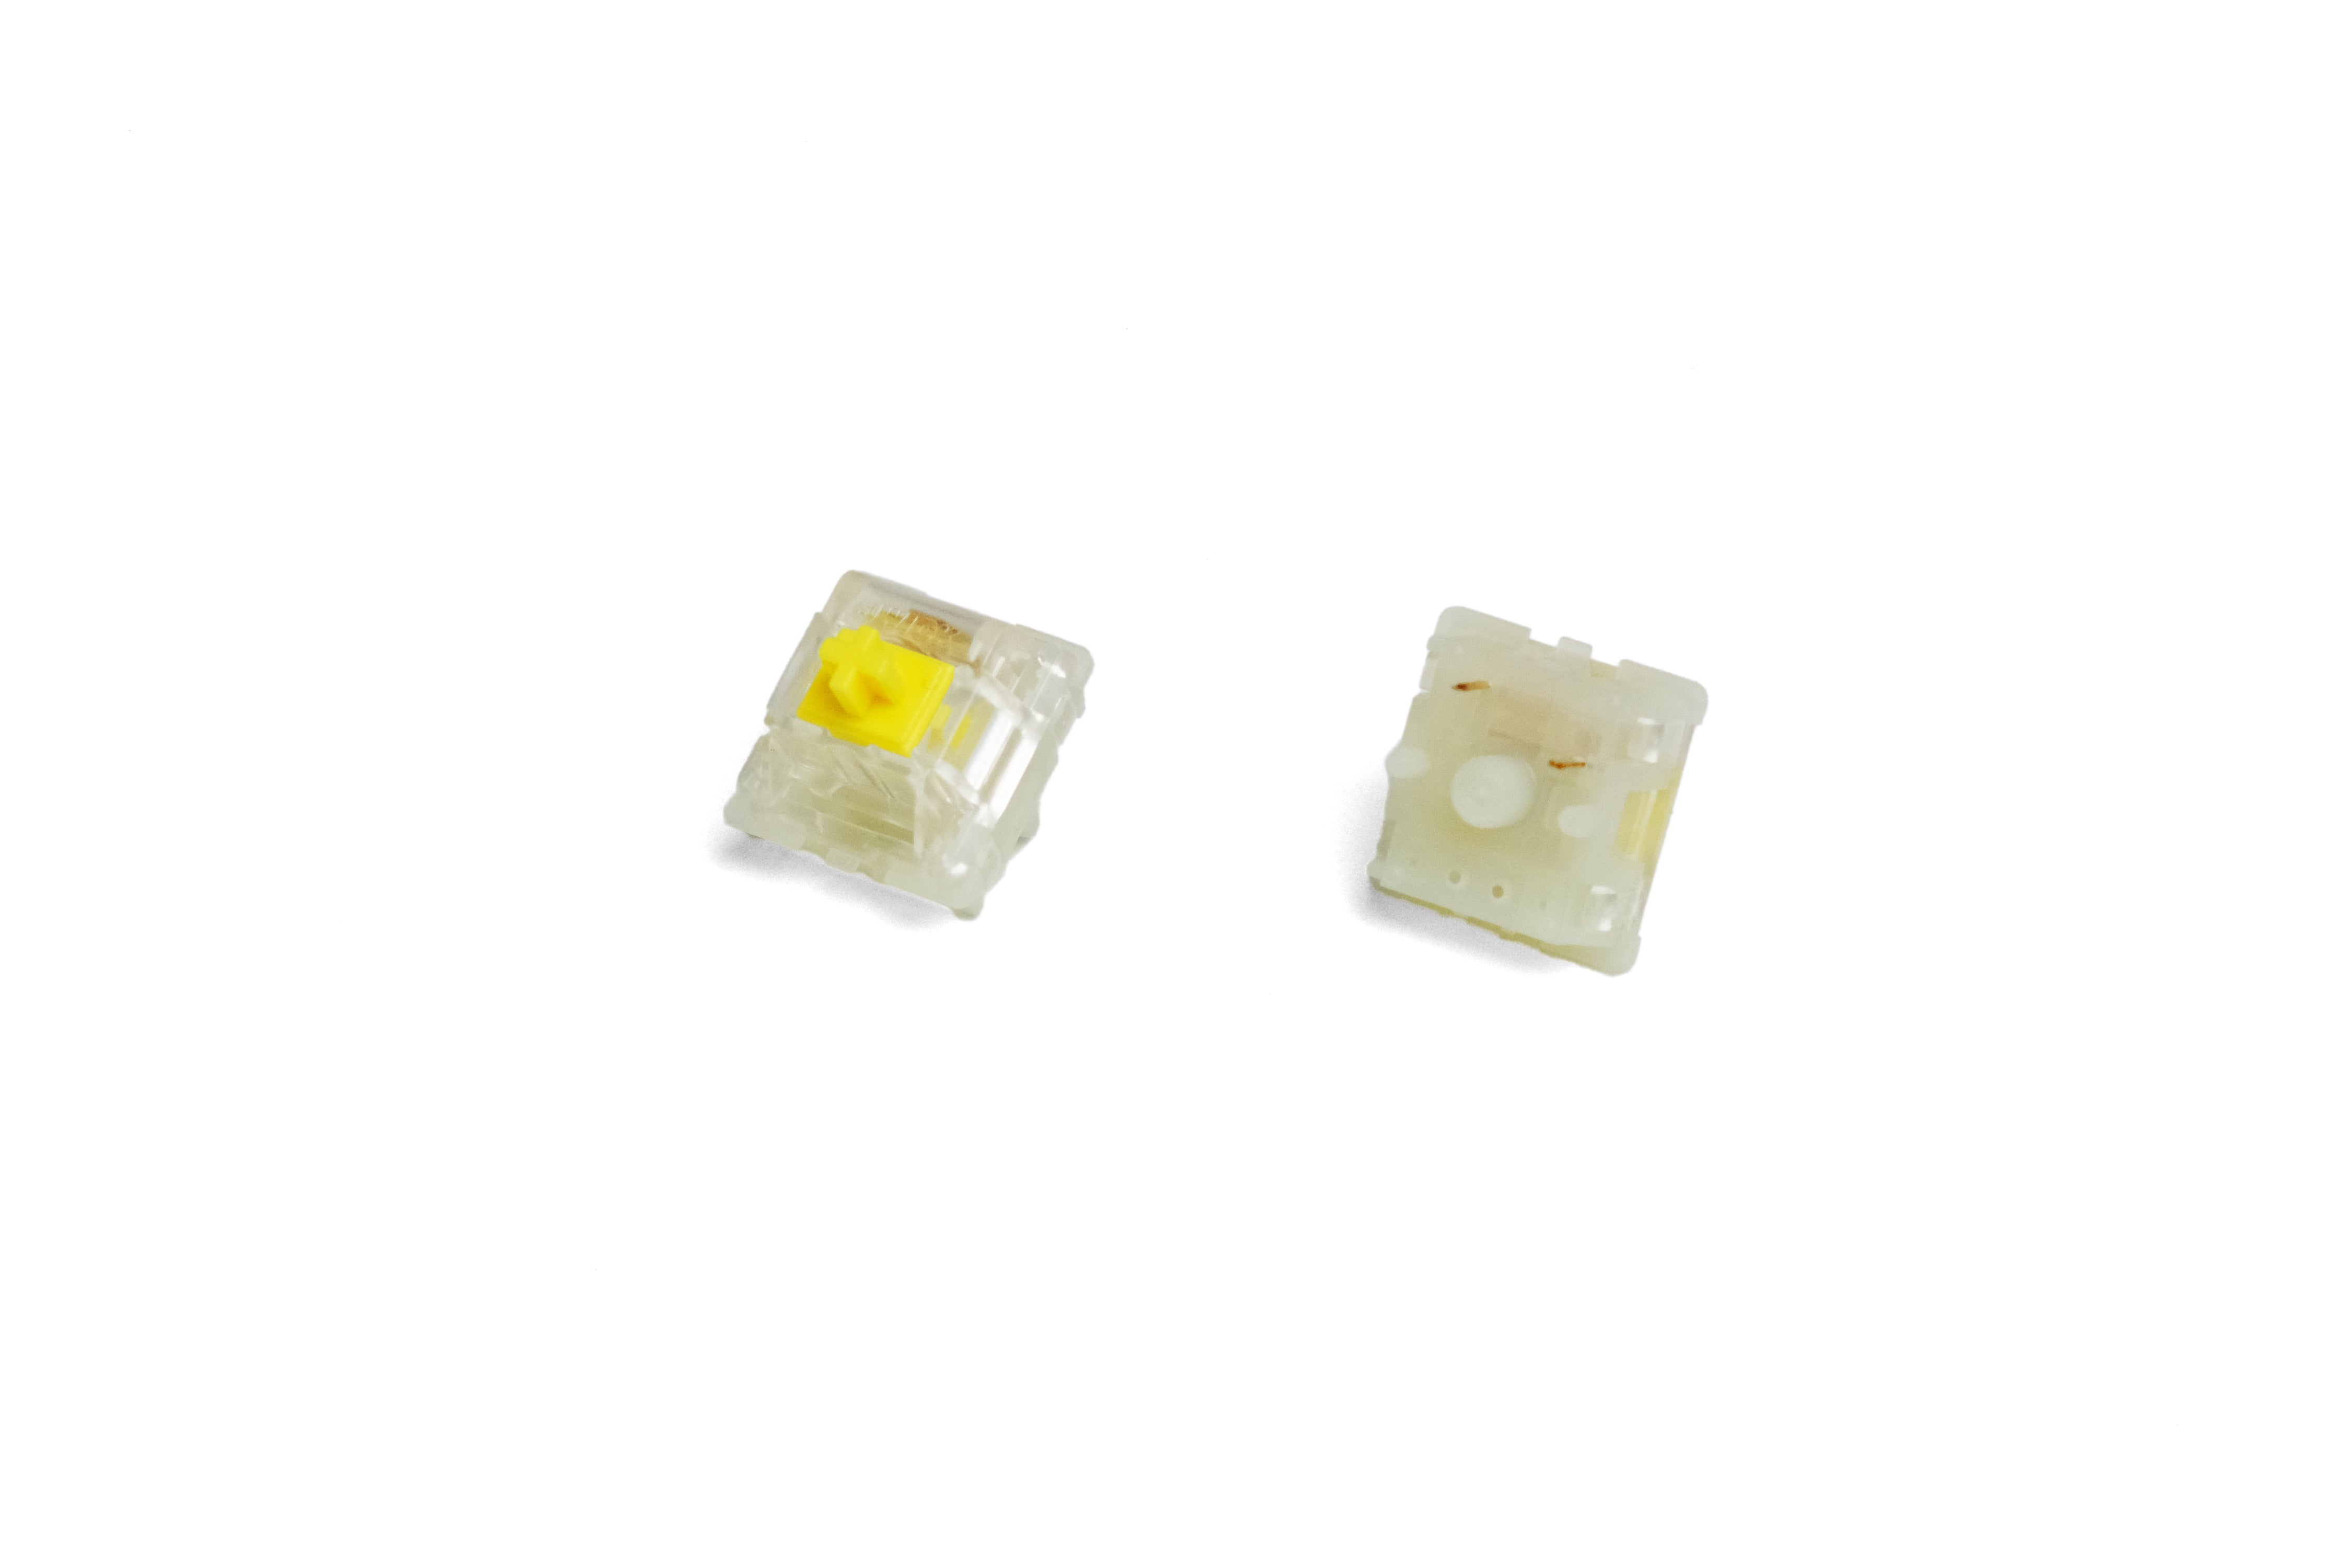 JWICK Yellow Linear Switches at KeebsForAll